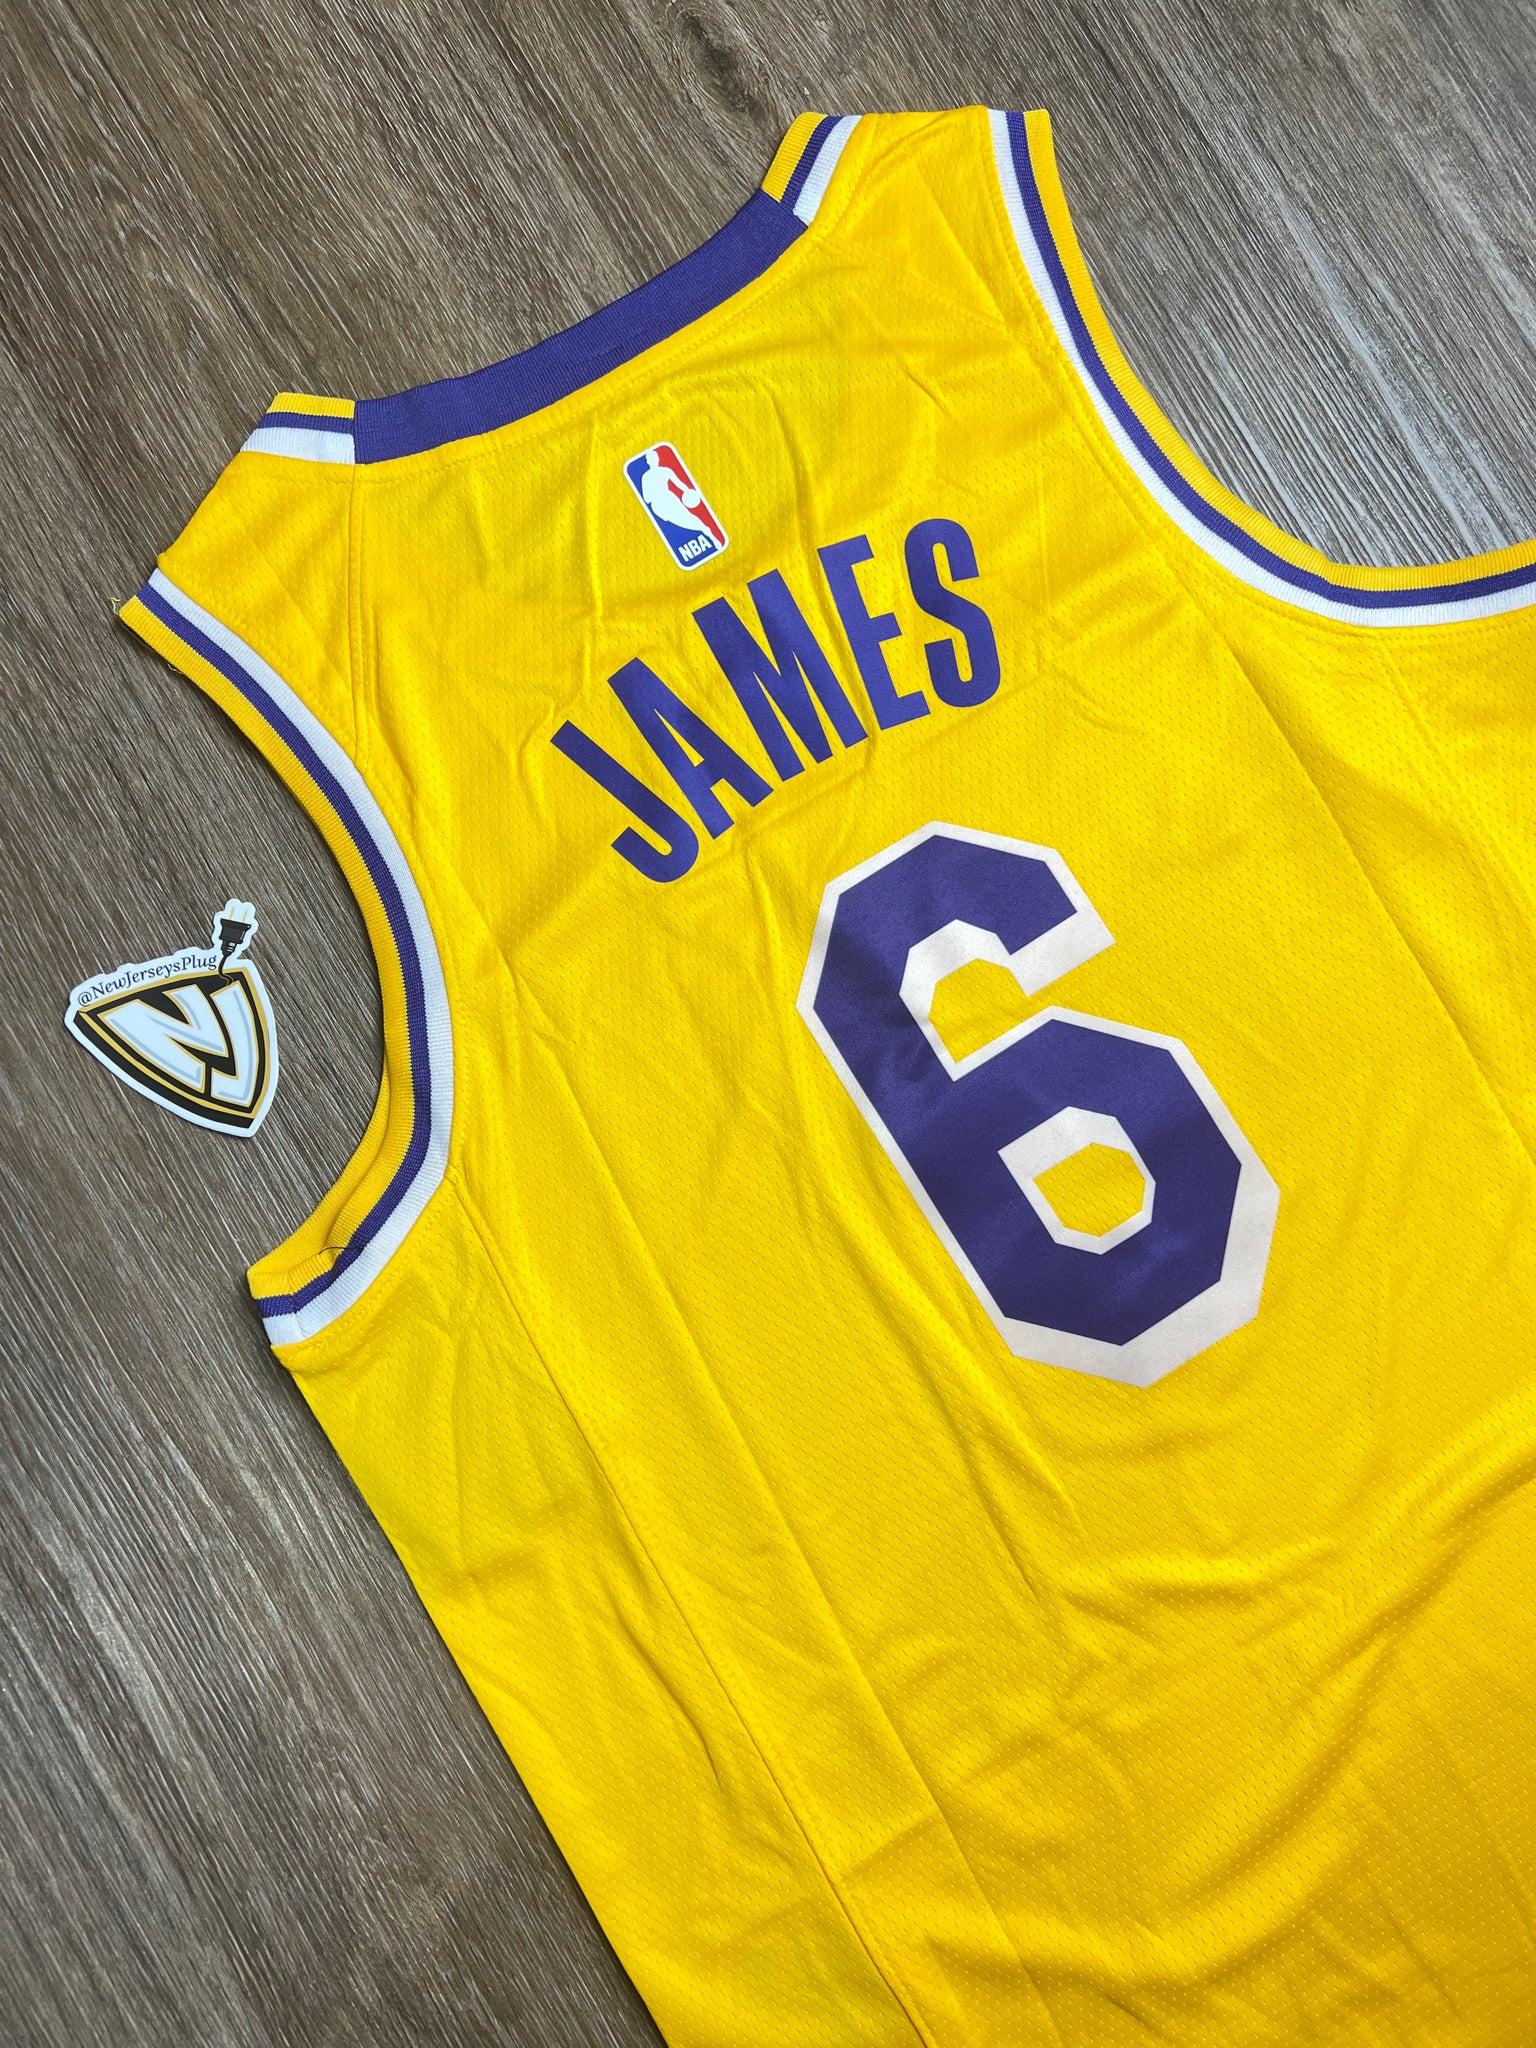 lakers jersey home